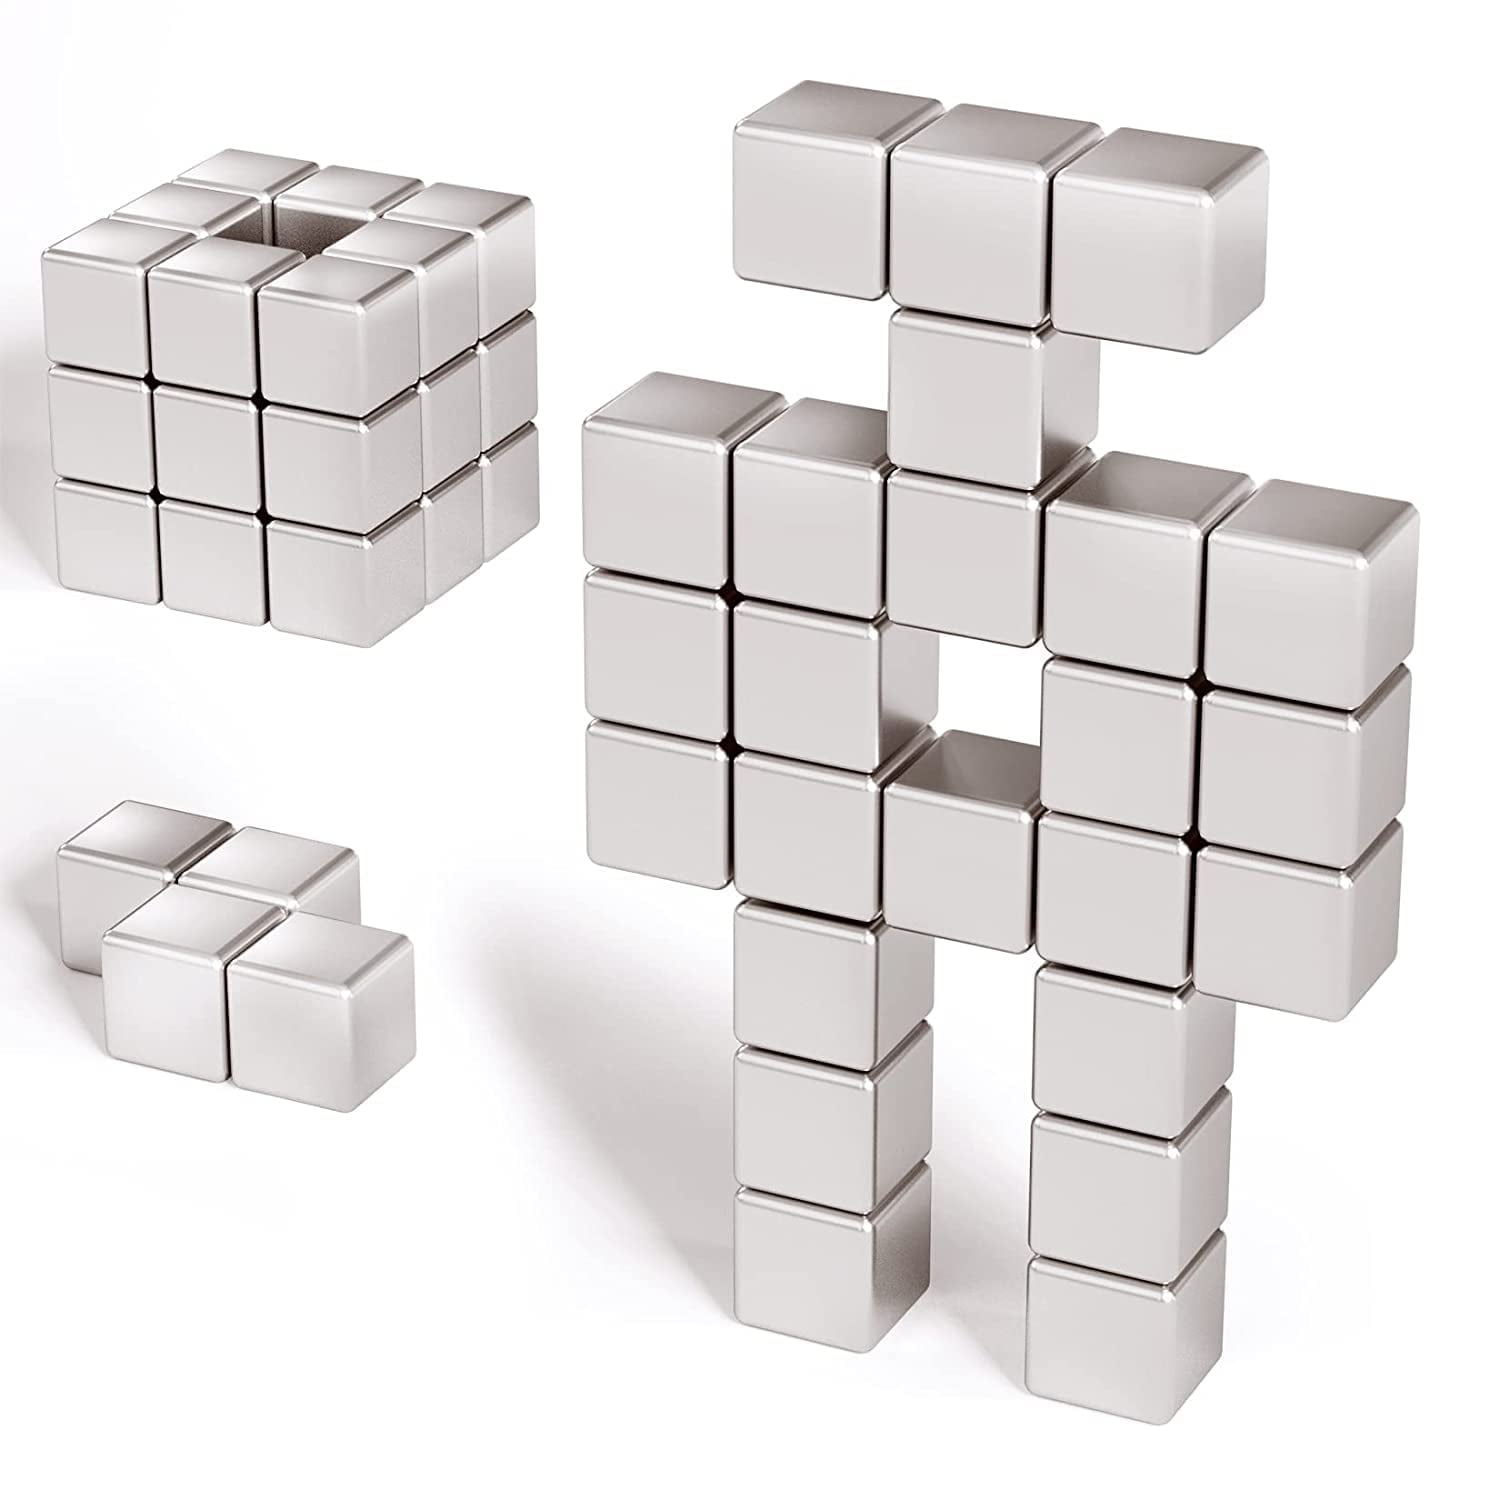 The latest design style Wrapables Cube Neodymium Magnets, Strong